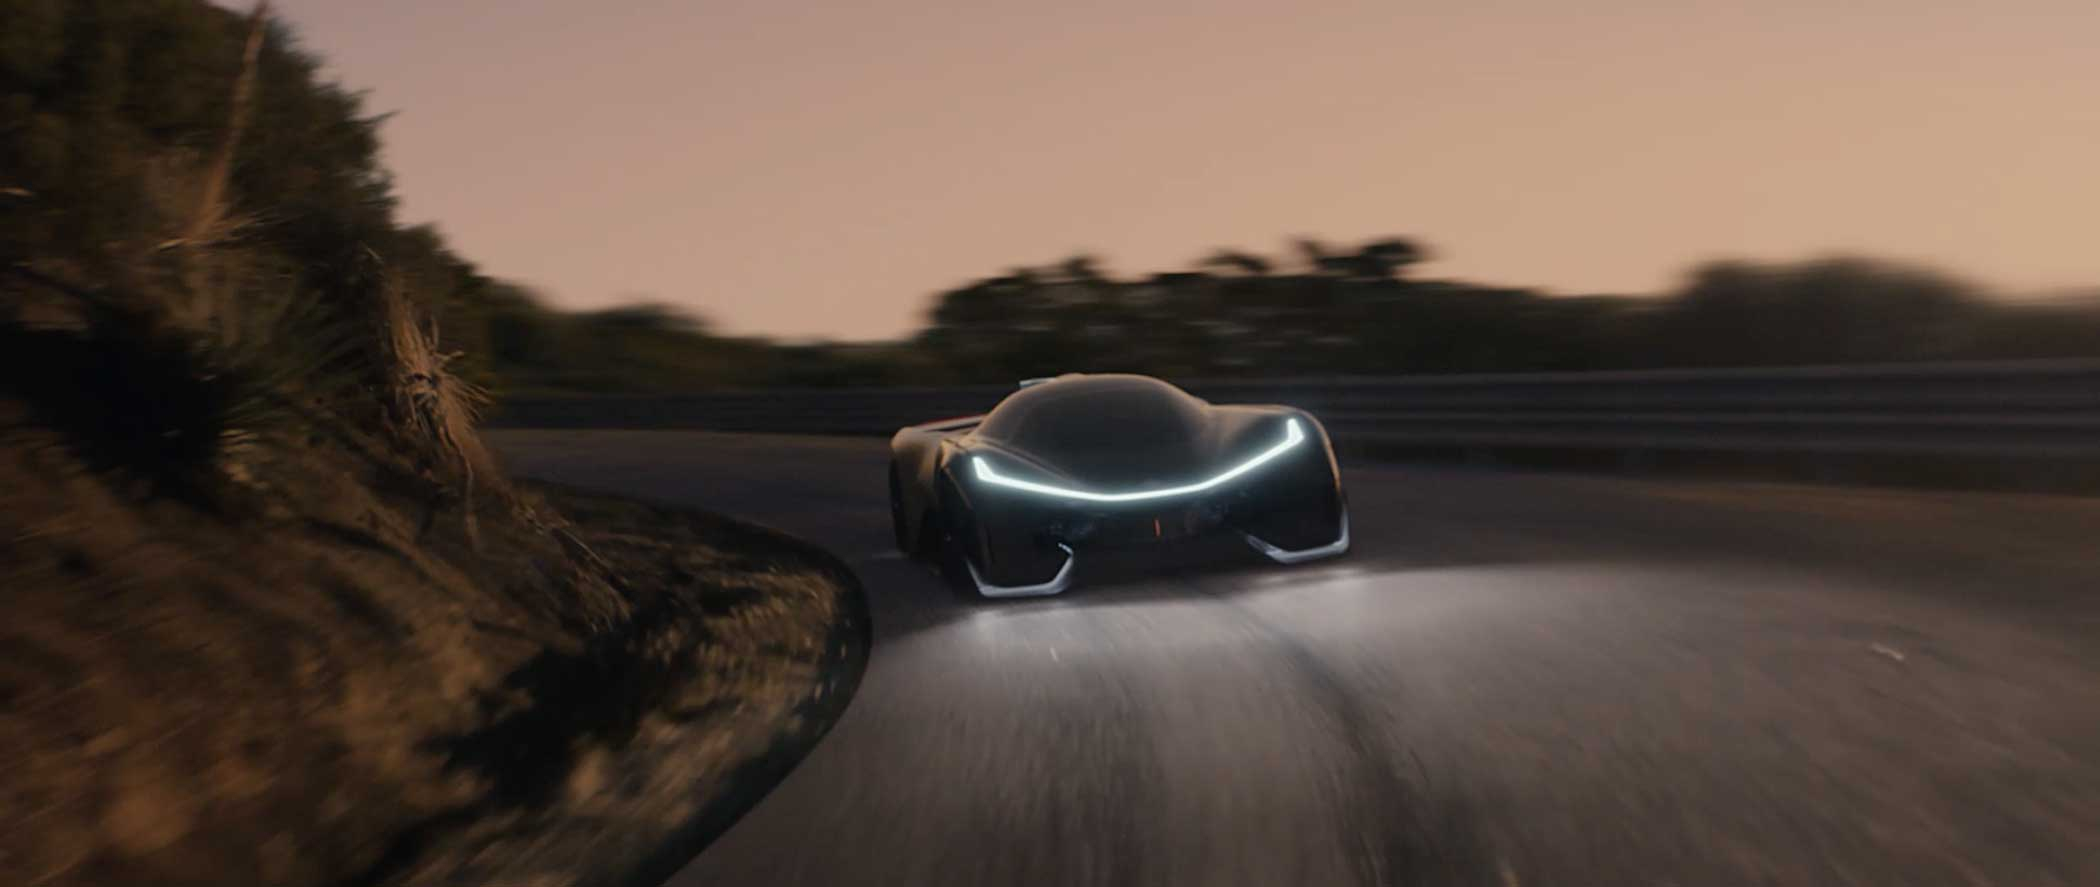 Faraday Future claims to be taking  a Silicon Valley approach to mobility